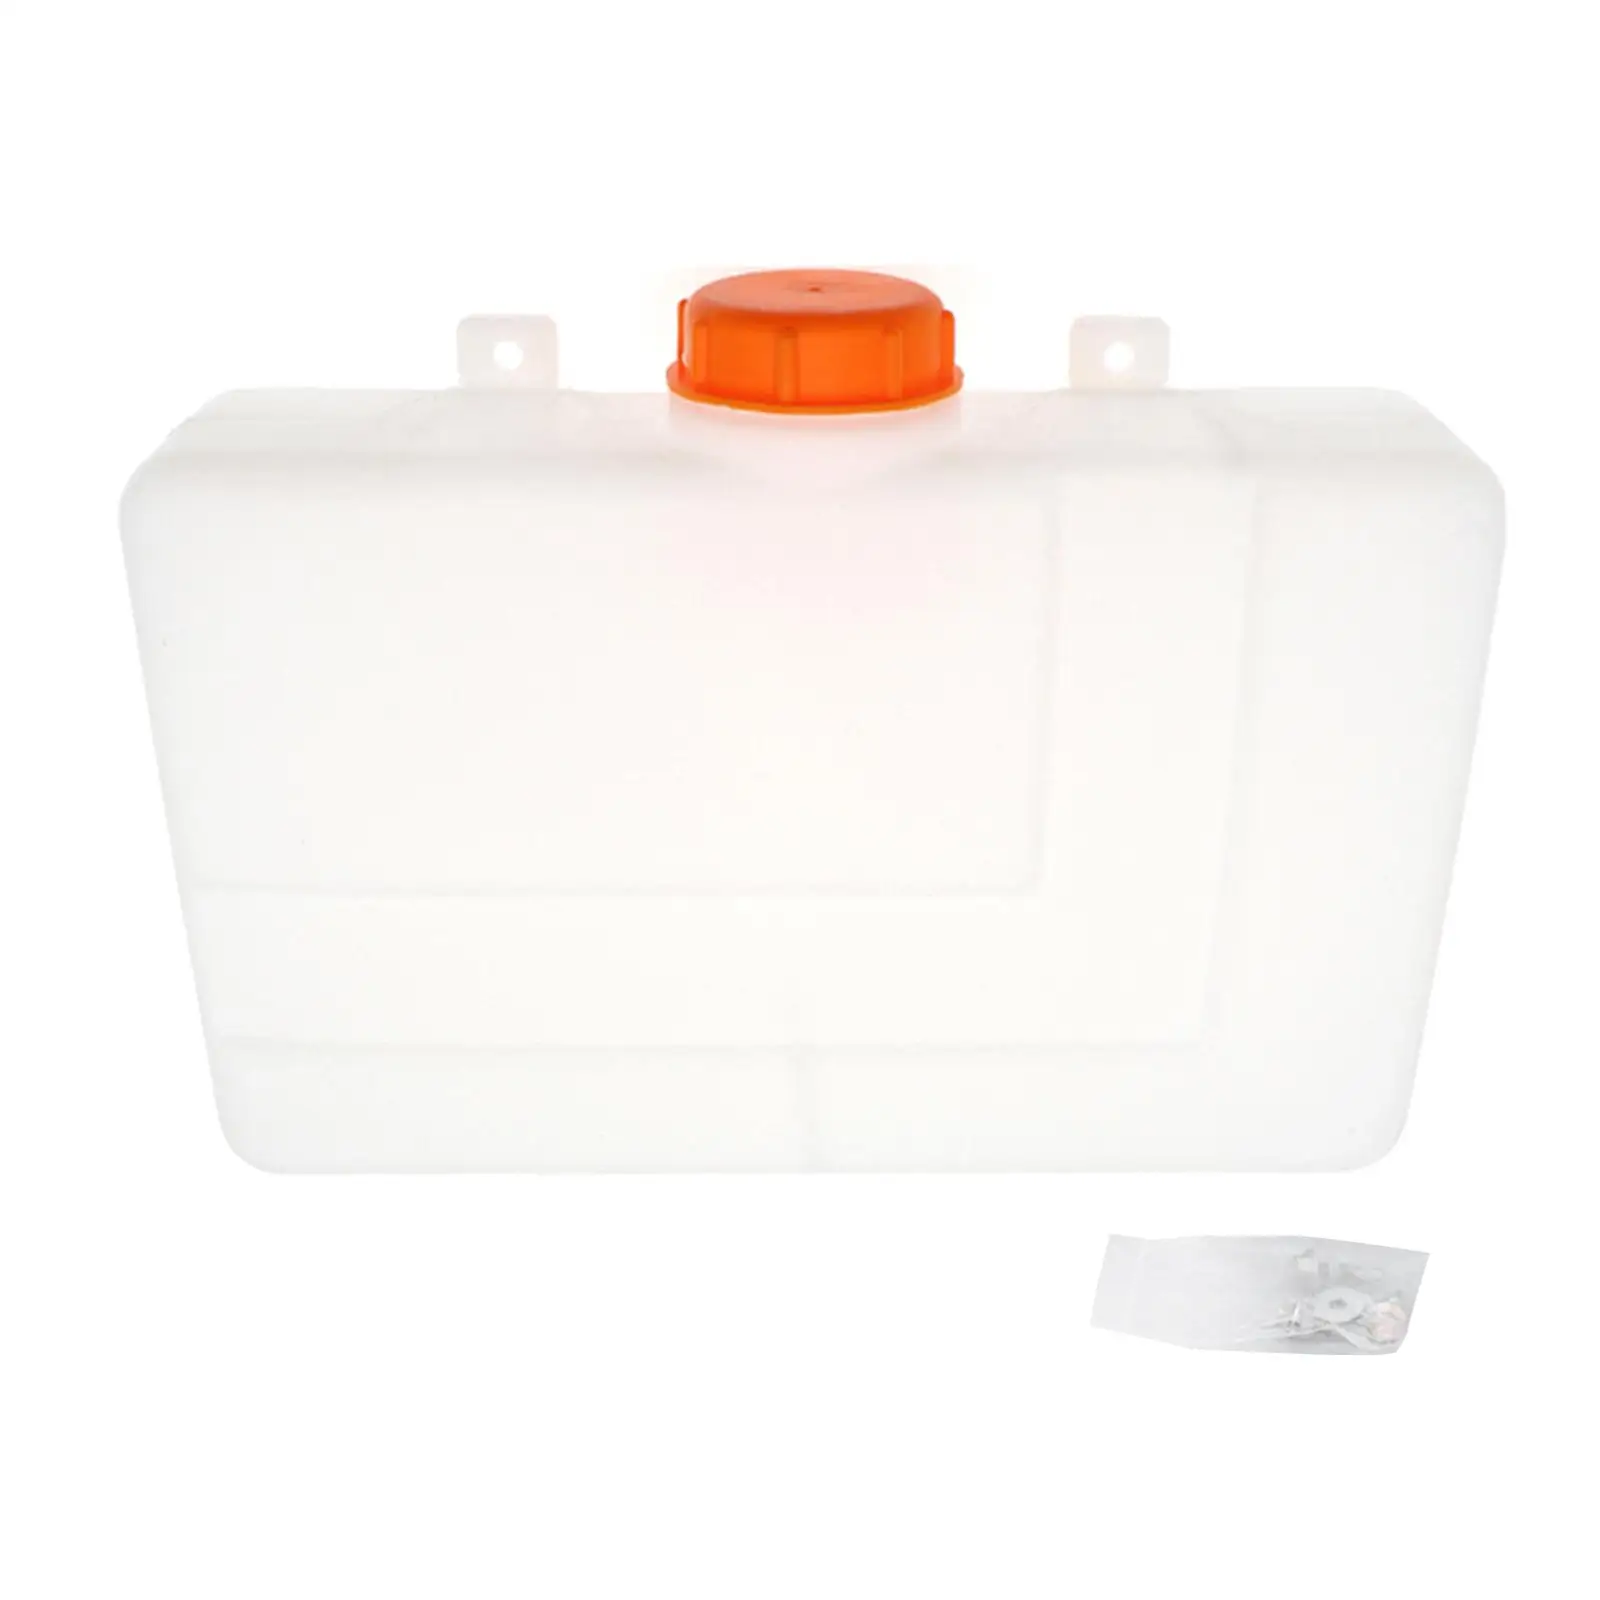 Gasoline Fuel Oil Tank 7L Plastic Spare Fuel Container Fit for Motorcycle ATV Most Cars